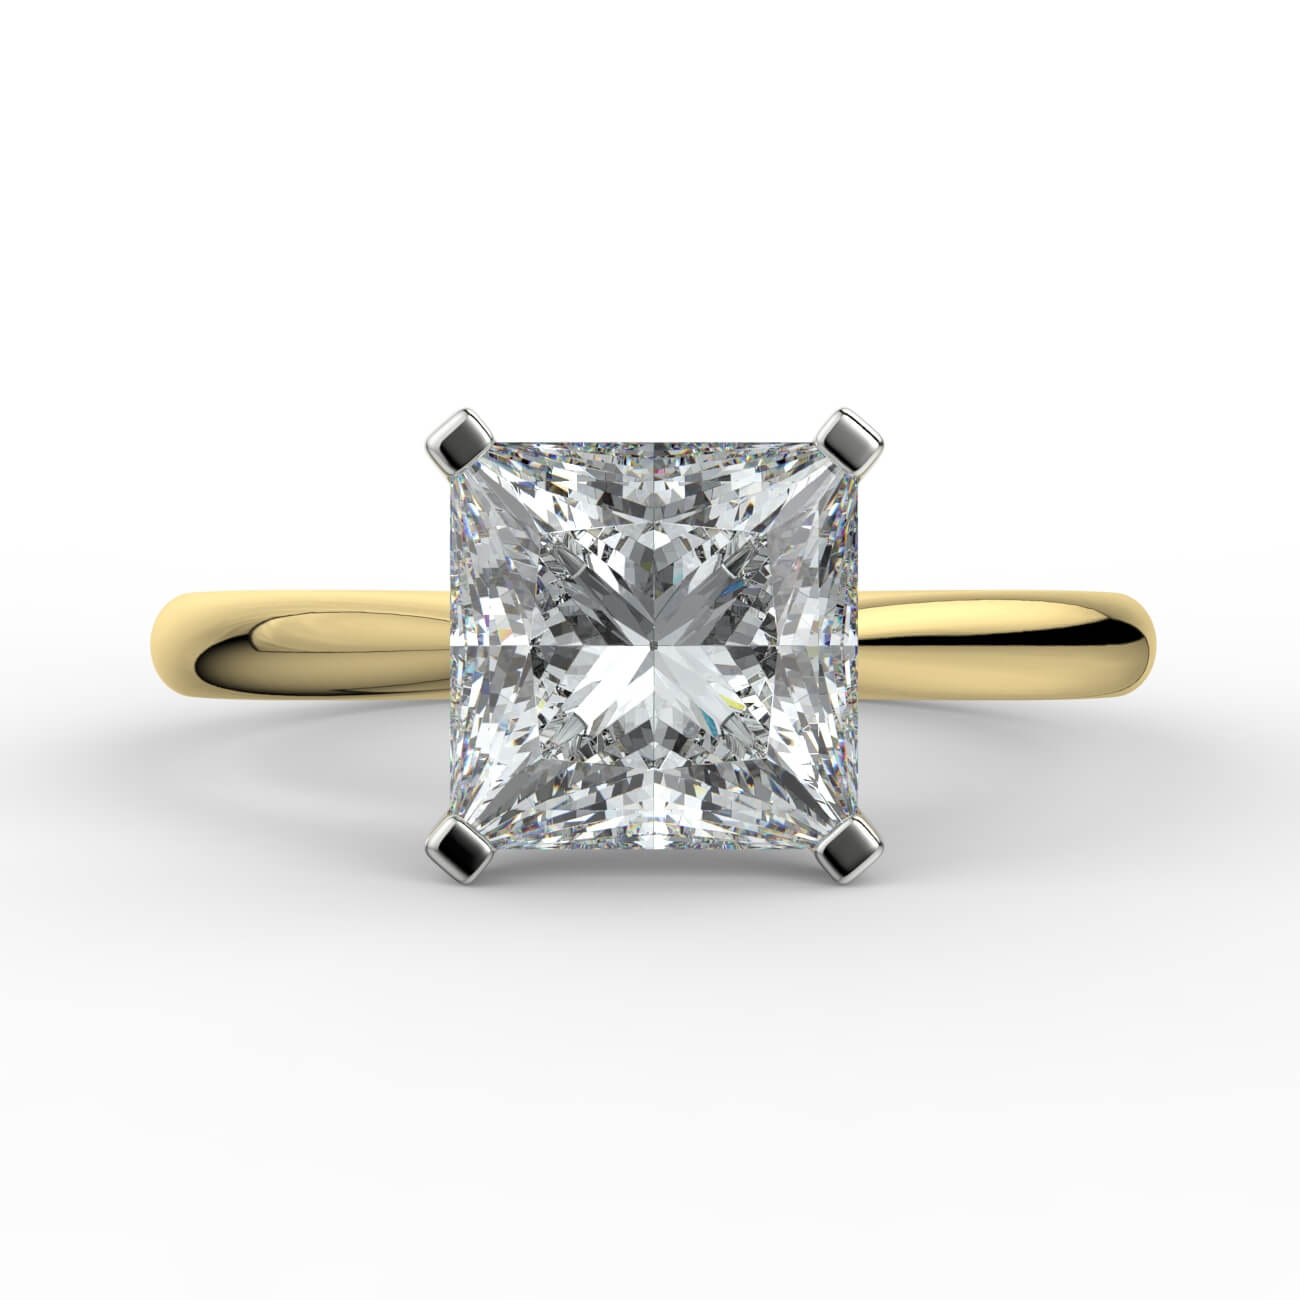 Princess cut diamond cathedral engagement ring in white and yellow gold – Australian Diamond Network